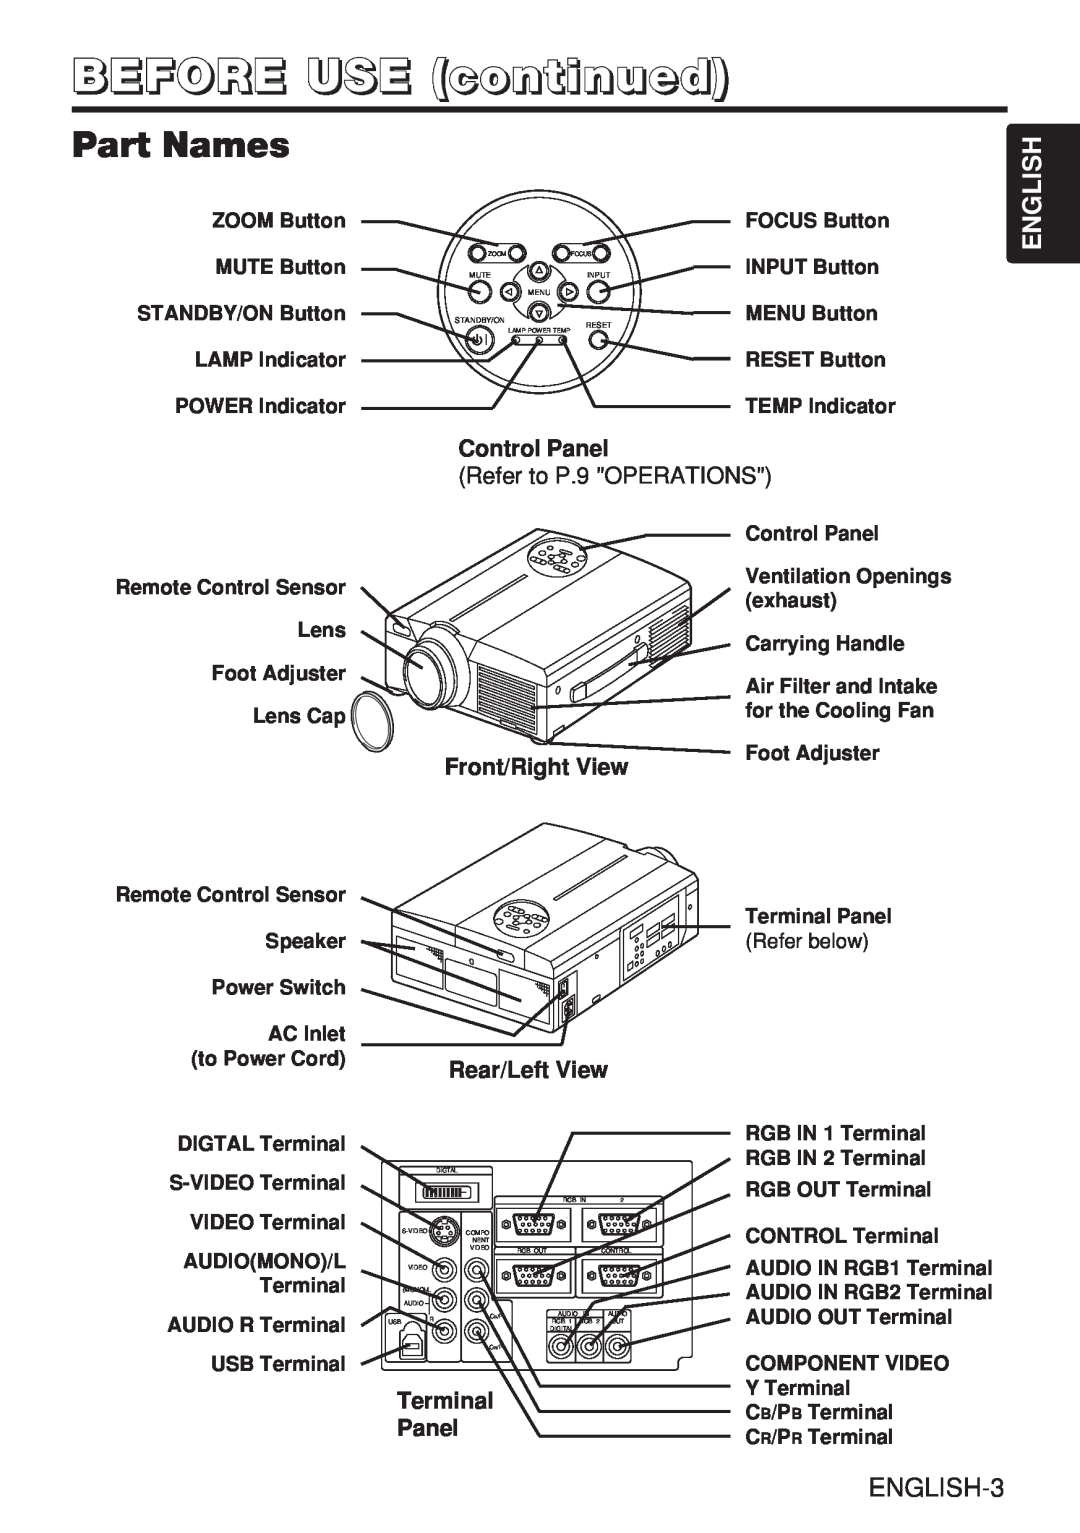 Hitachi CP-X980W user manual BEFORE USE continued, Part Names, English 